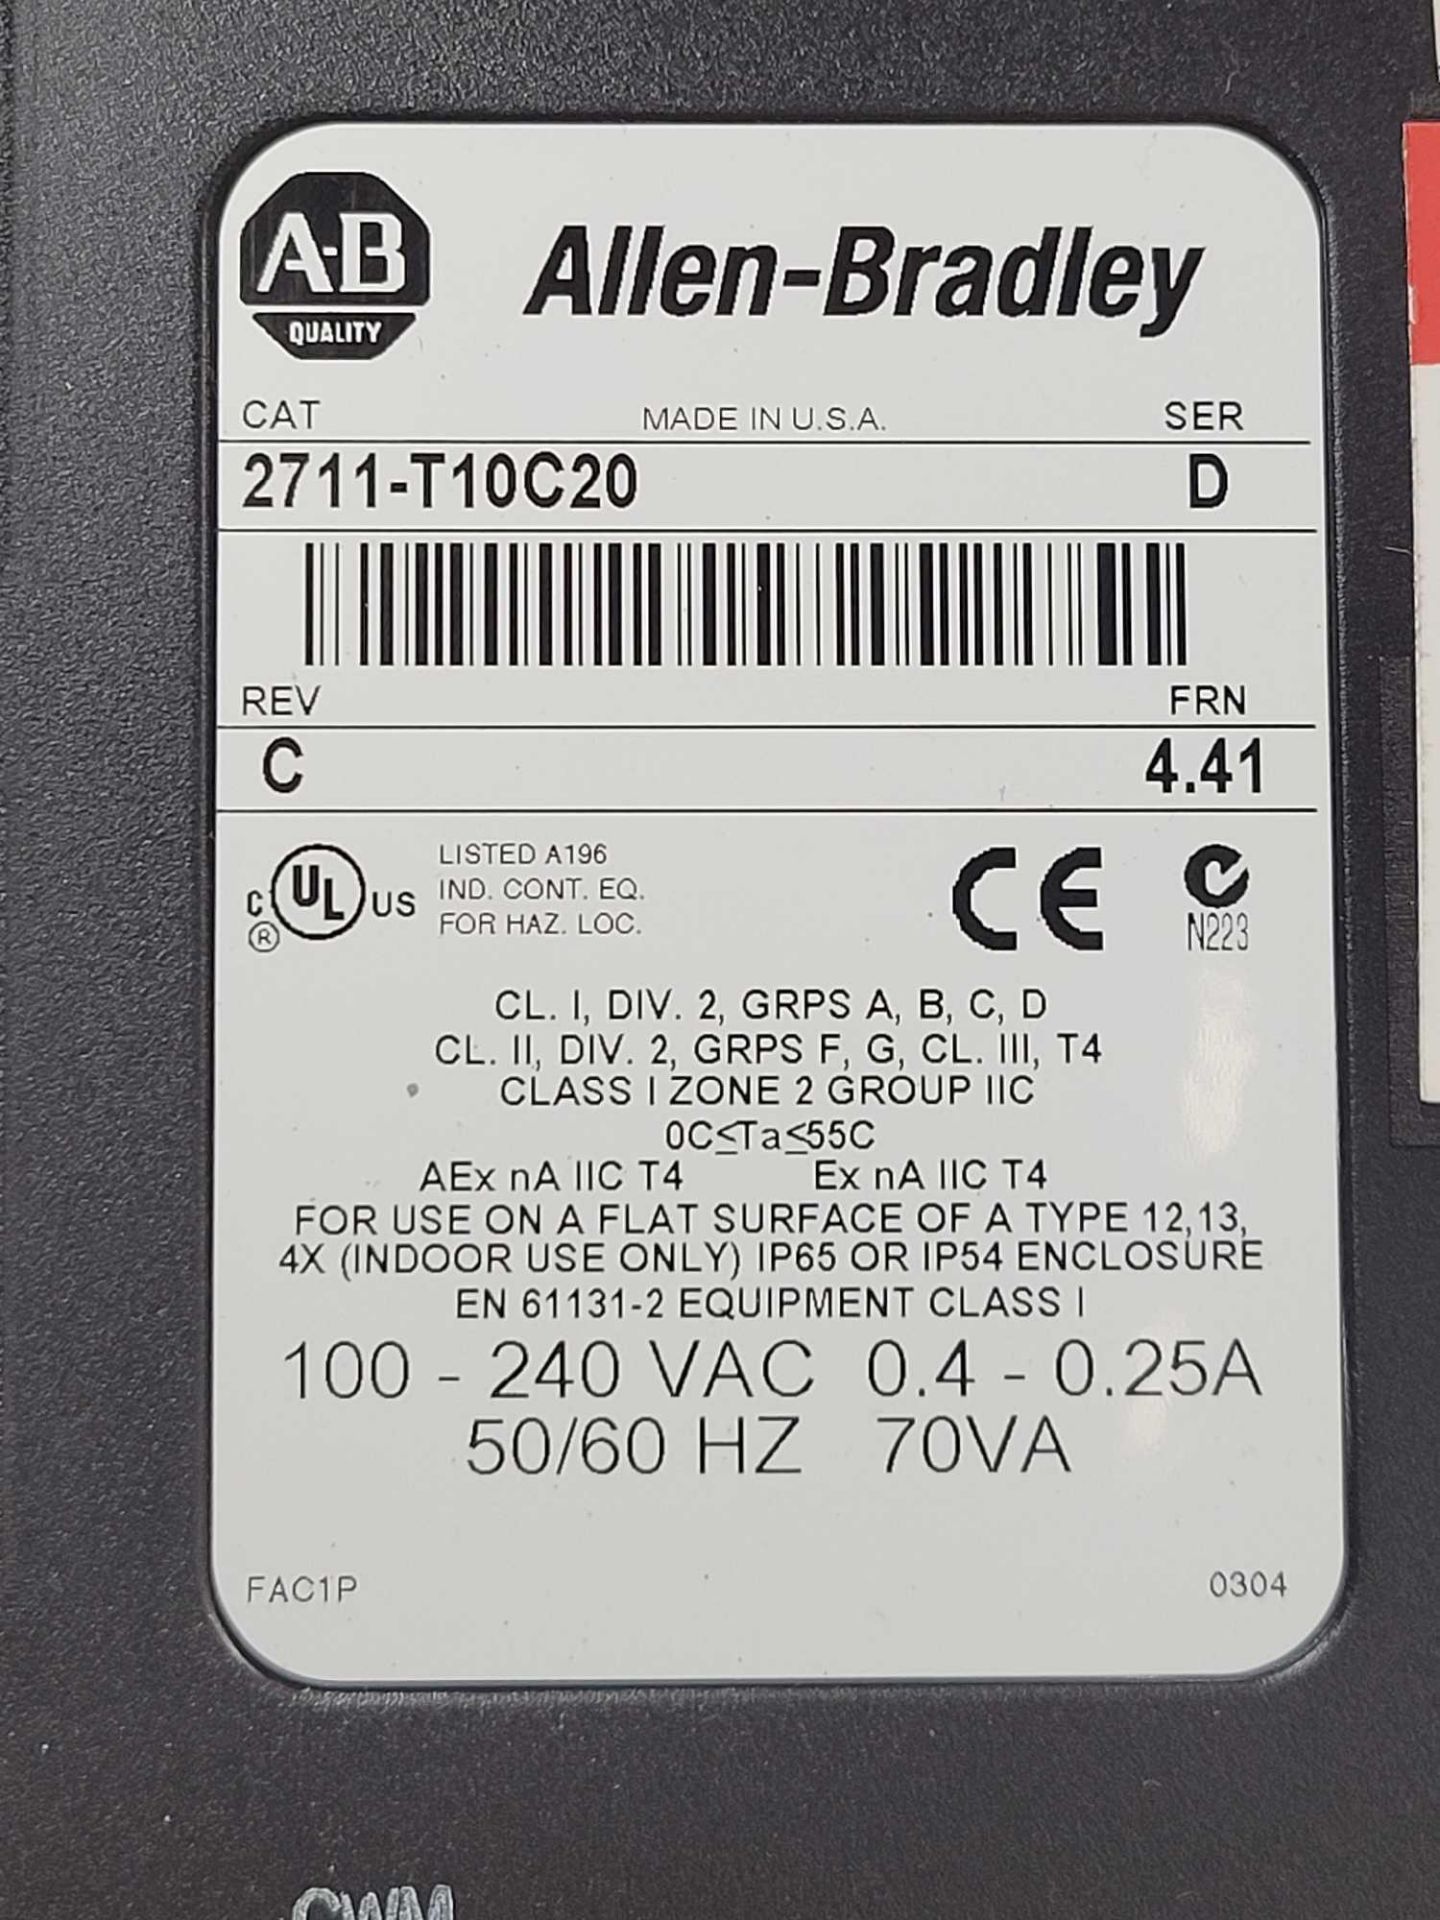 ALLEN BRADLEY 2711-T10C20 / PanelView 1000 Touch Screen Operator Interface  /  Lot Weight: 6.6 lbs - Image 3 of 6